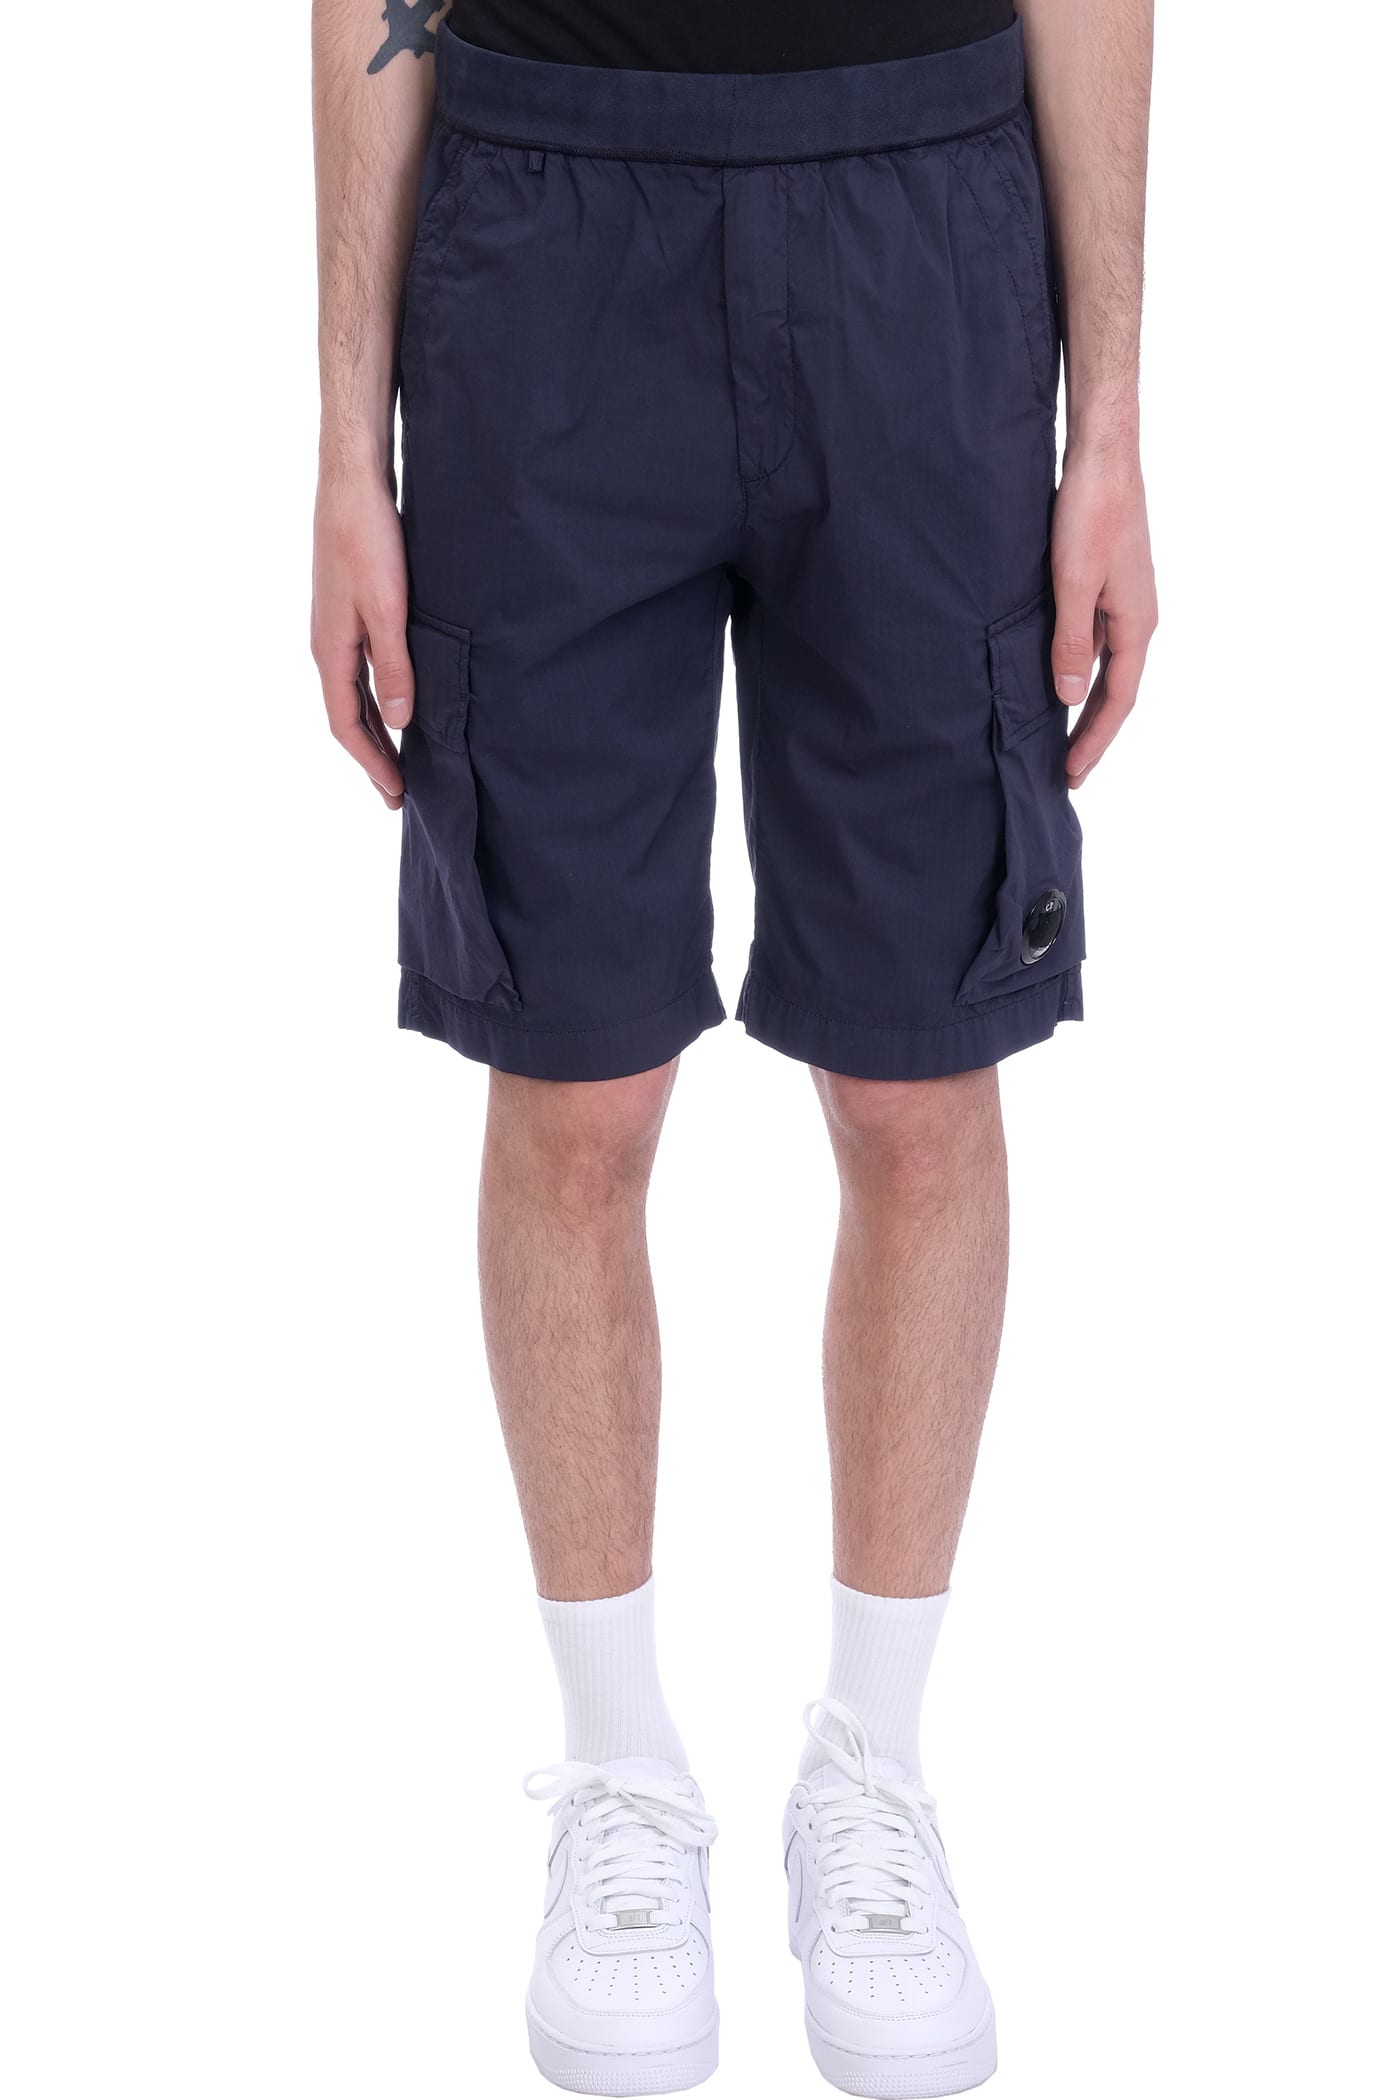 C.P. Company Shorts In Blue Cotton